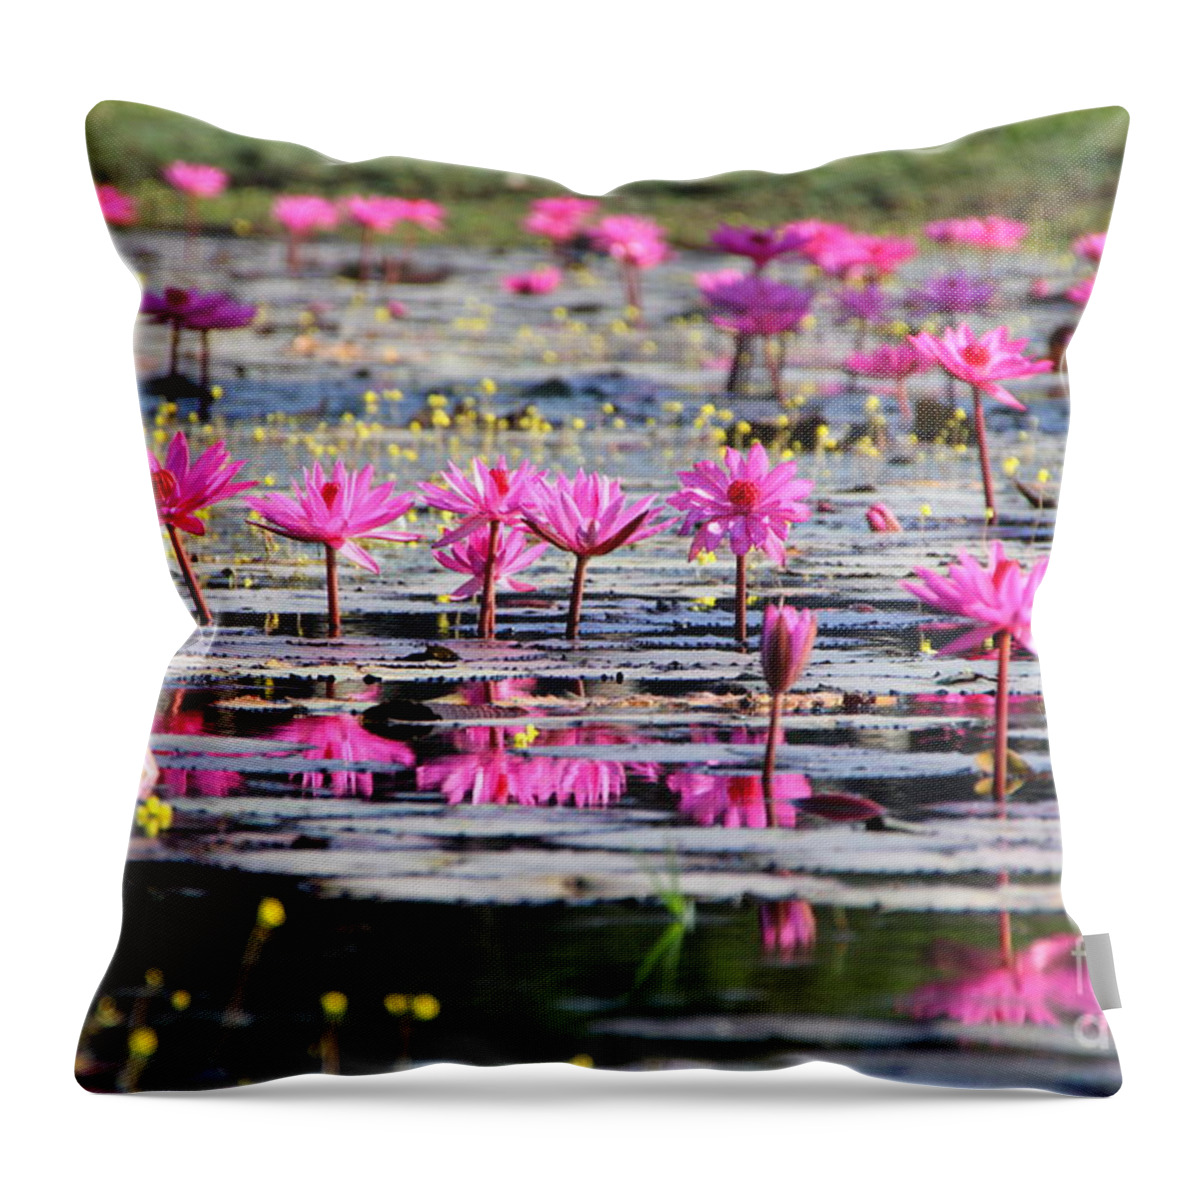 Aquatic Throw Pillow featuring the photograph Lotus flowers by Amanda Mohler